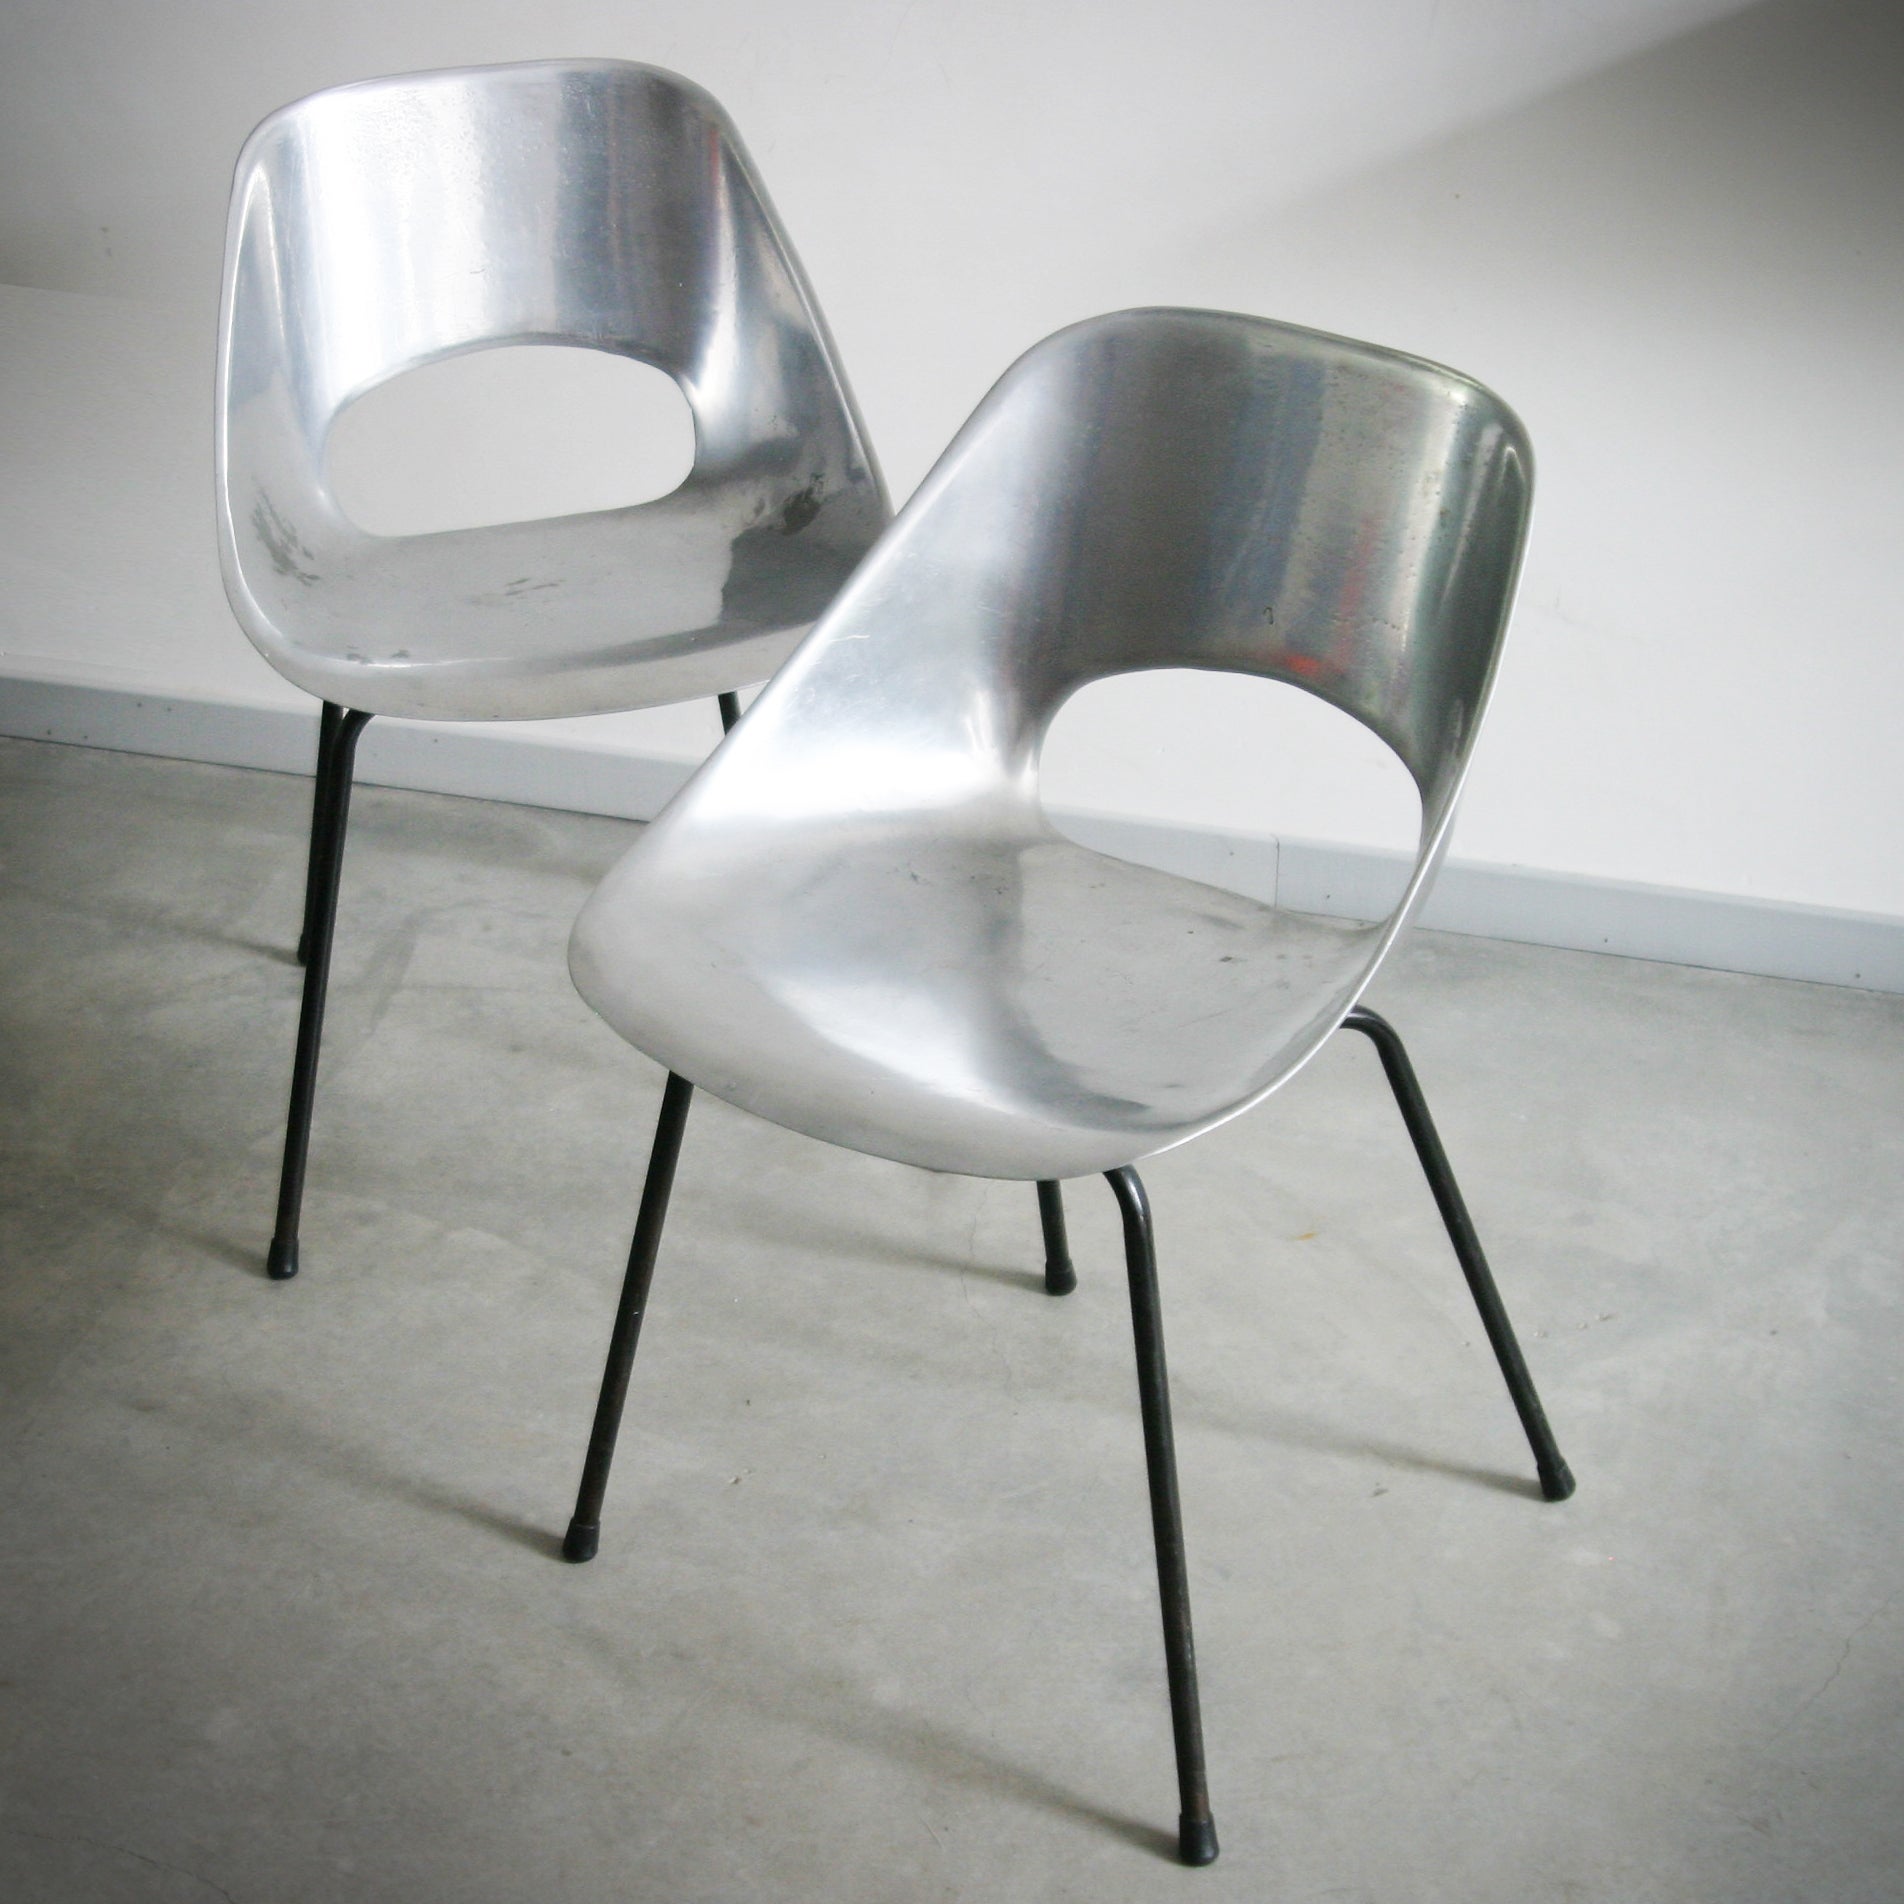 Pair of 'Tulipe' chairs by Pierre Guariche